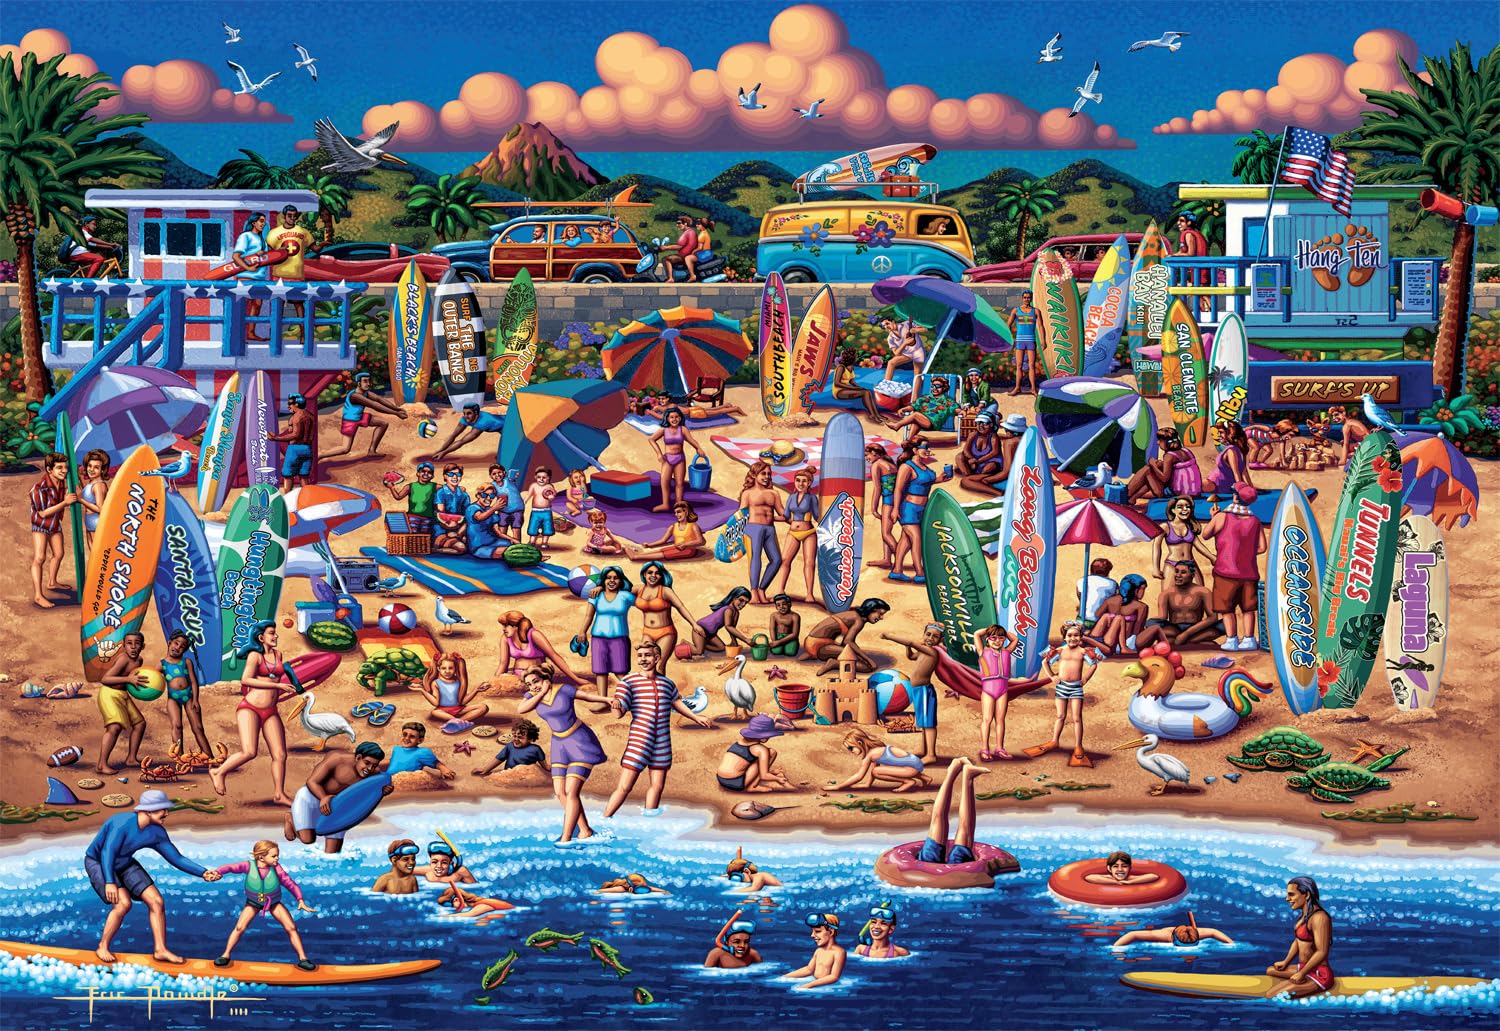 Buffalo Games - Surfin' USA - 2000 Piece Jigsaw Puzzle for Adults Challenging Puzzle Perfect for Game Night - 2000 Piece Finished Size is 38.50 x 26.50